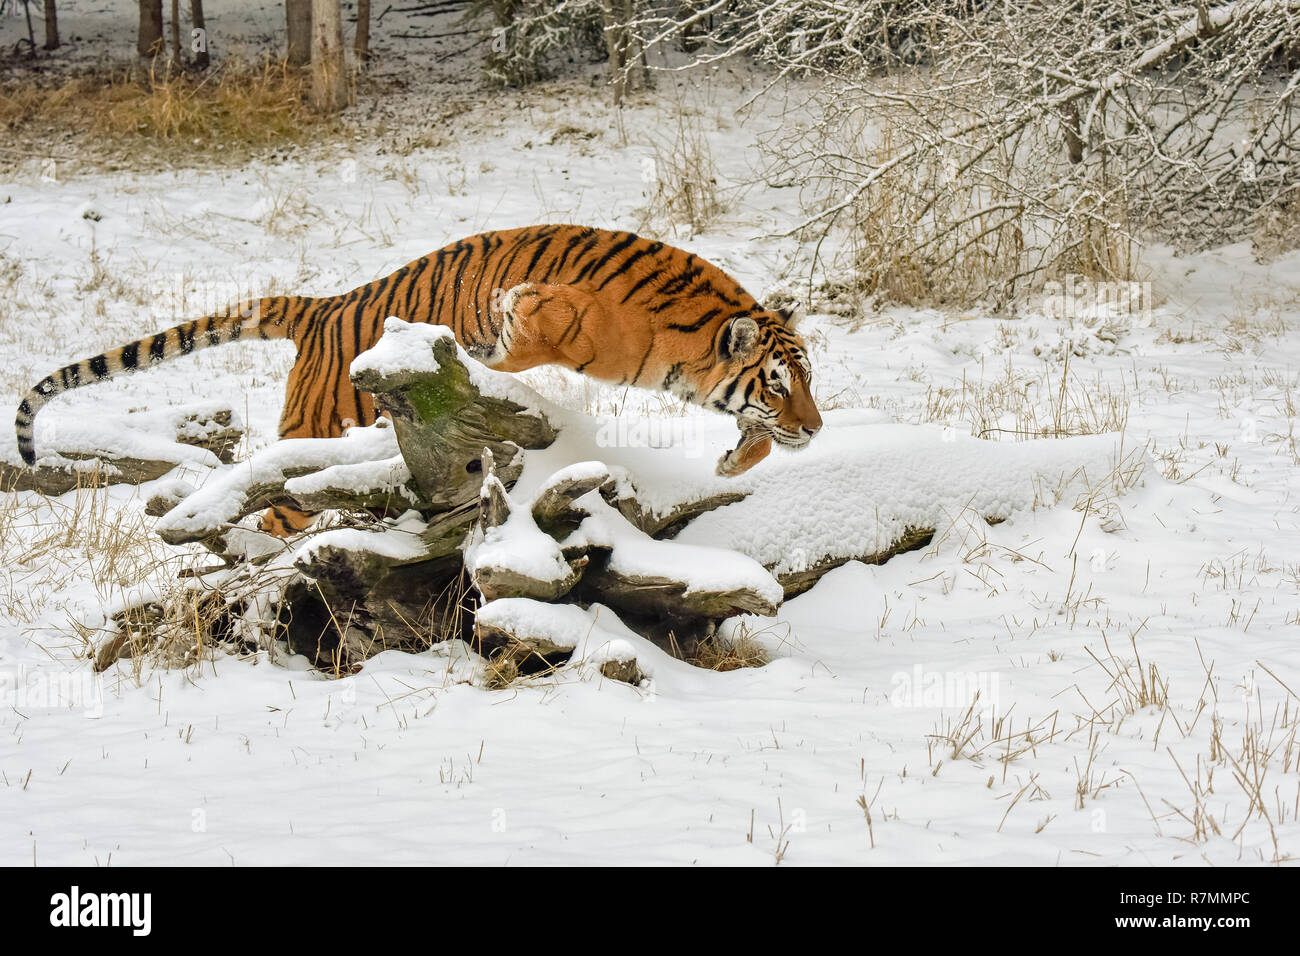 Tiger Jumping over a Snow Covered Log in Winter Stock Photo